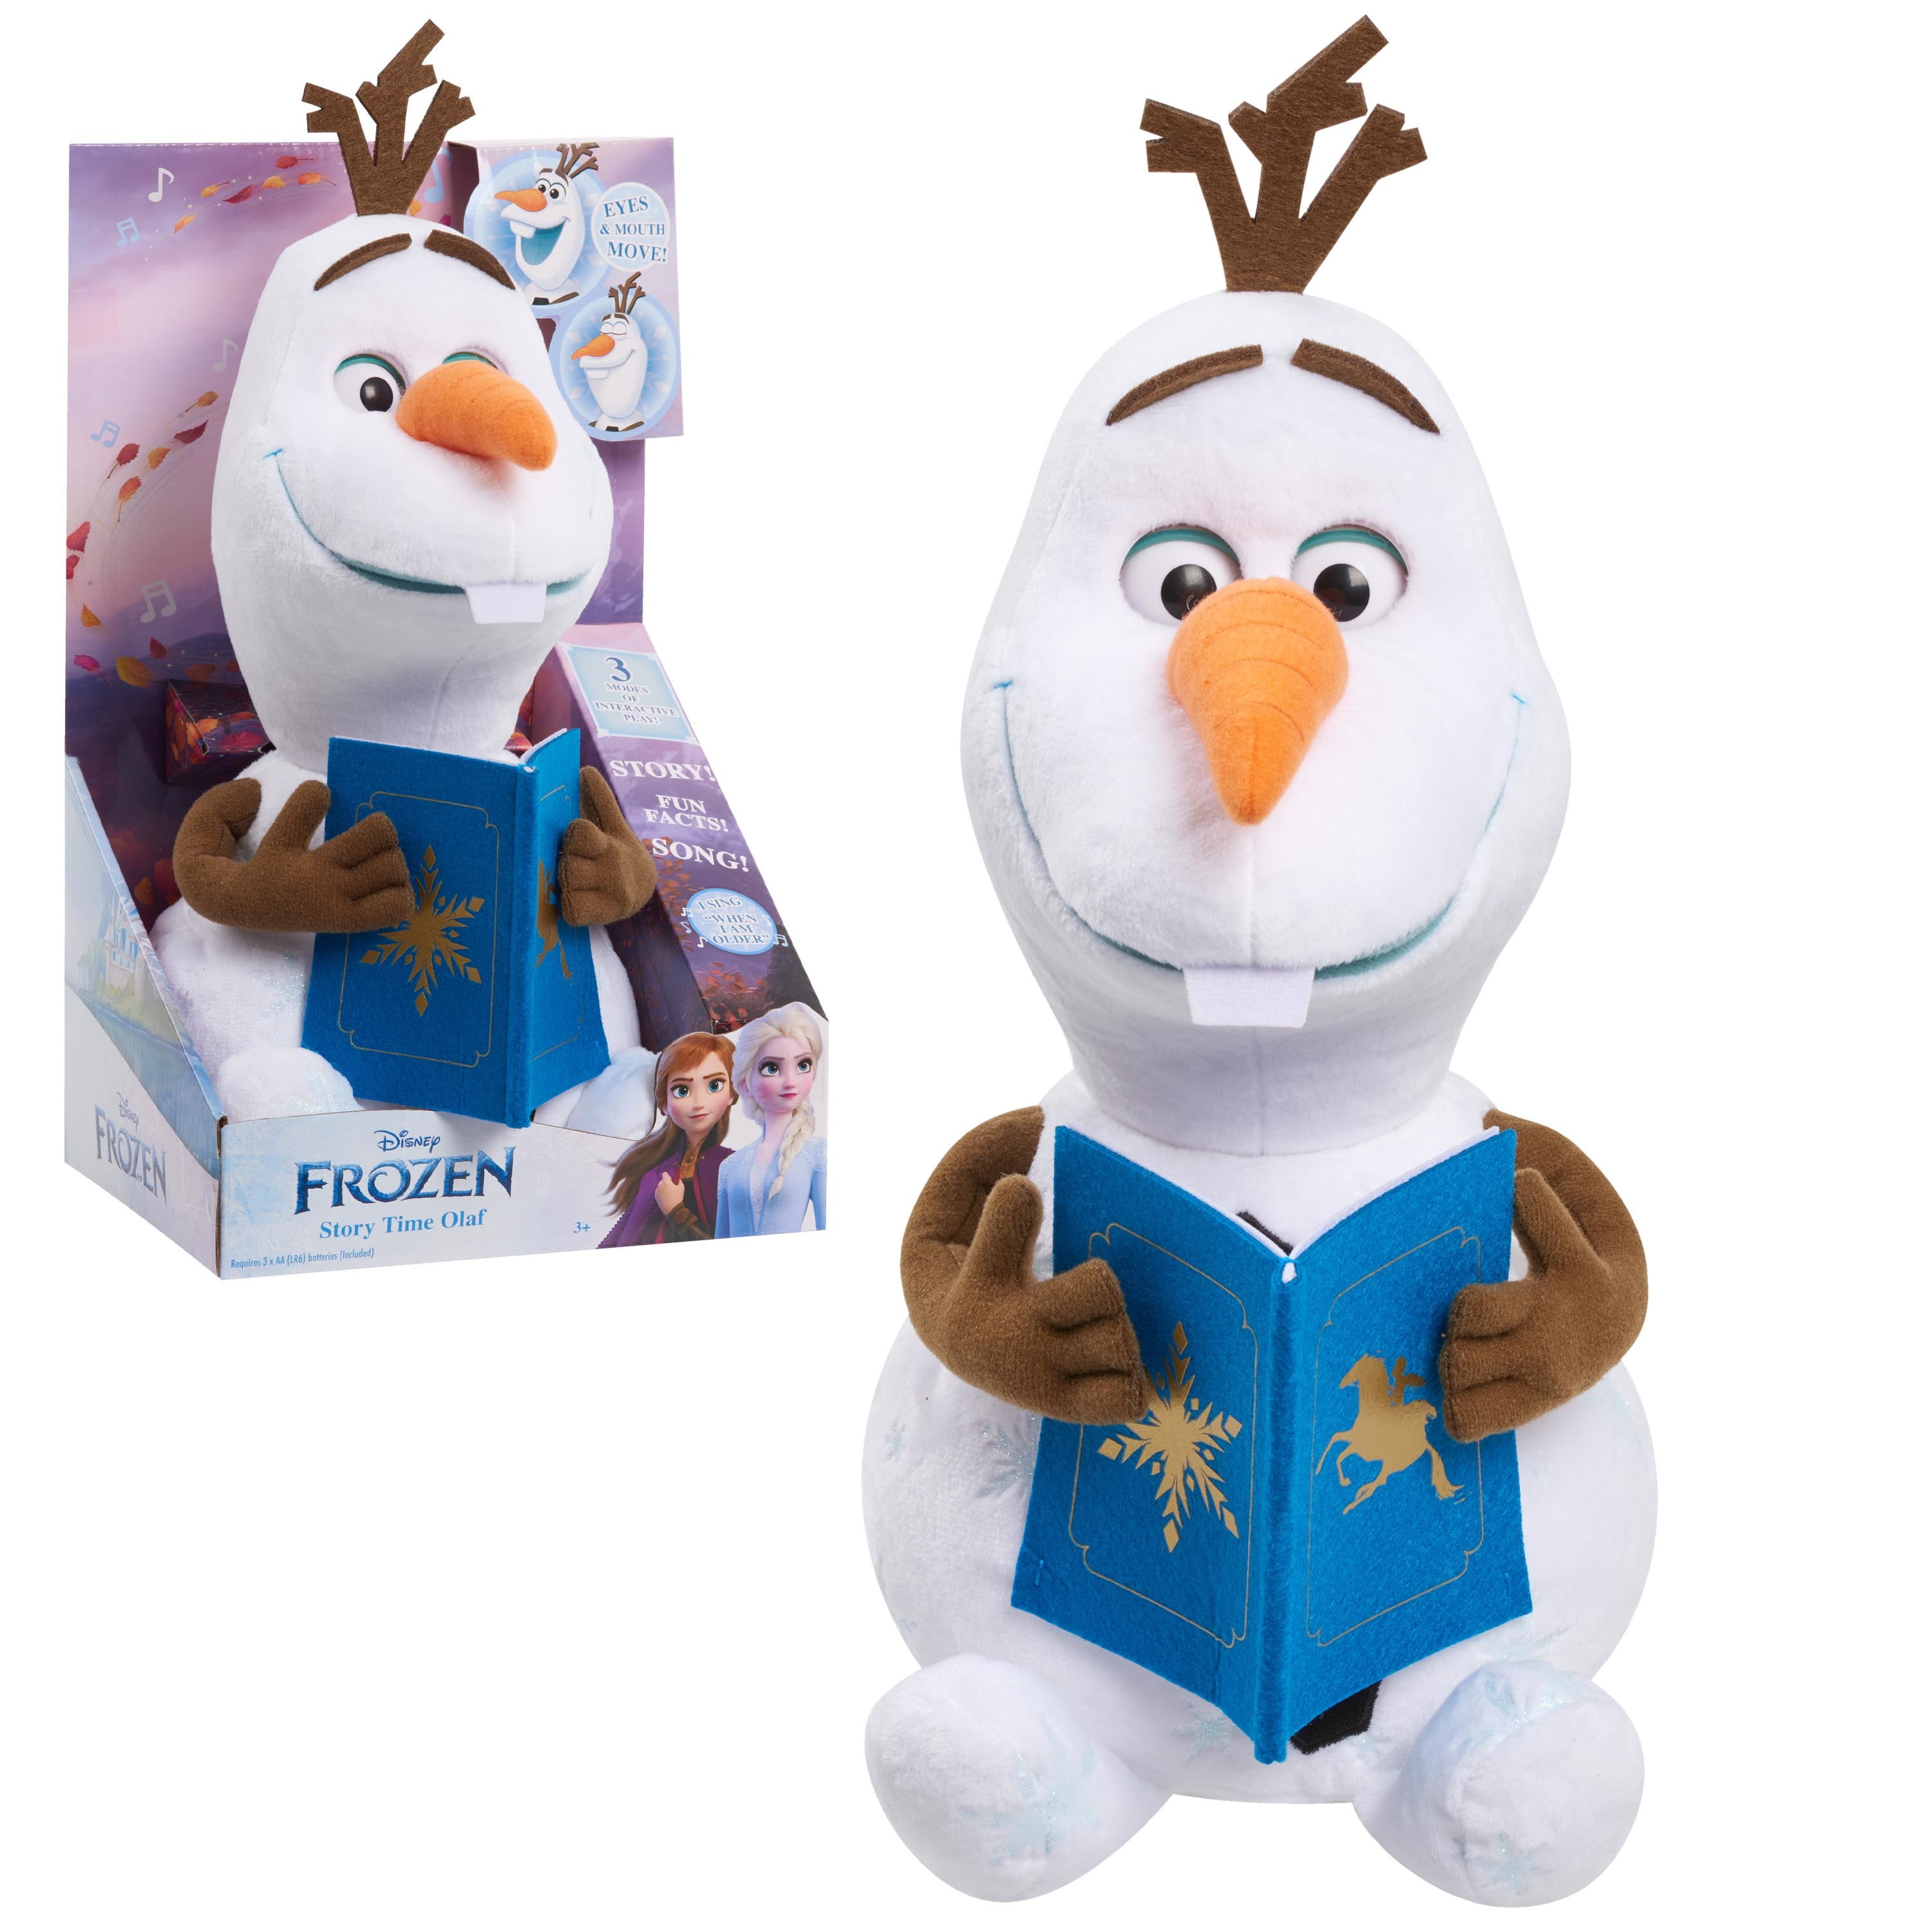 Disney Frozen Story Time Olaf by Just Play 12 Inch Talking and Singing Interactive Feature Plush Toy with 3 Modes of Play 